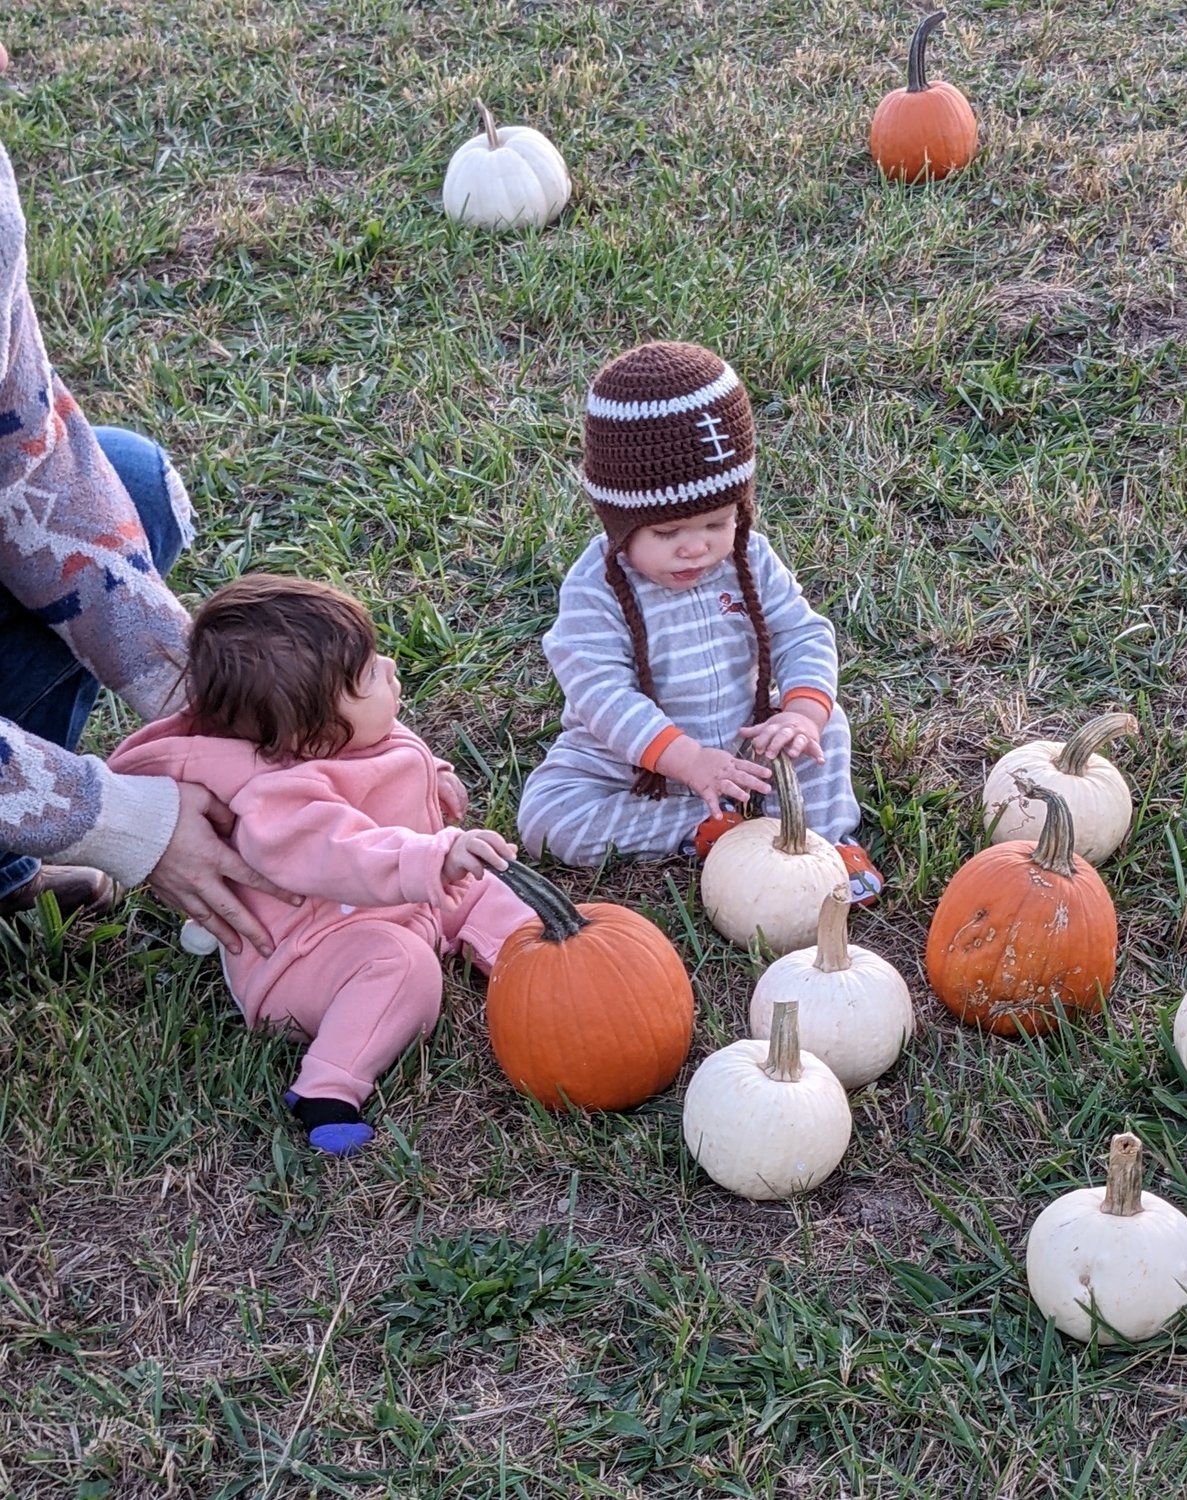 Hadley Phillips and Brody Swortwood play with pumpkins.